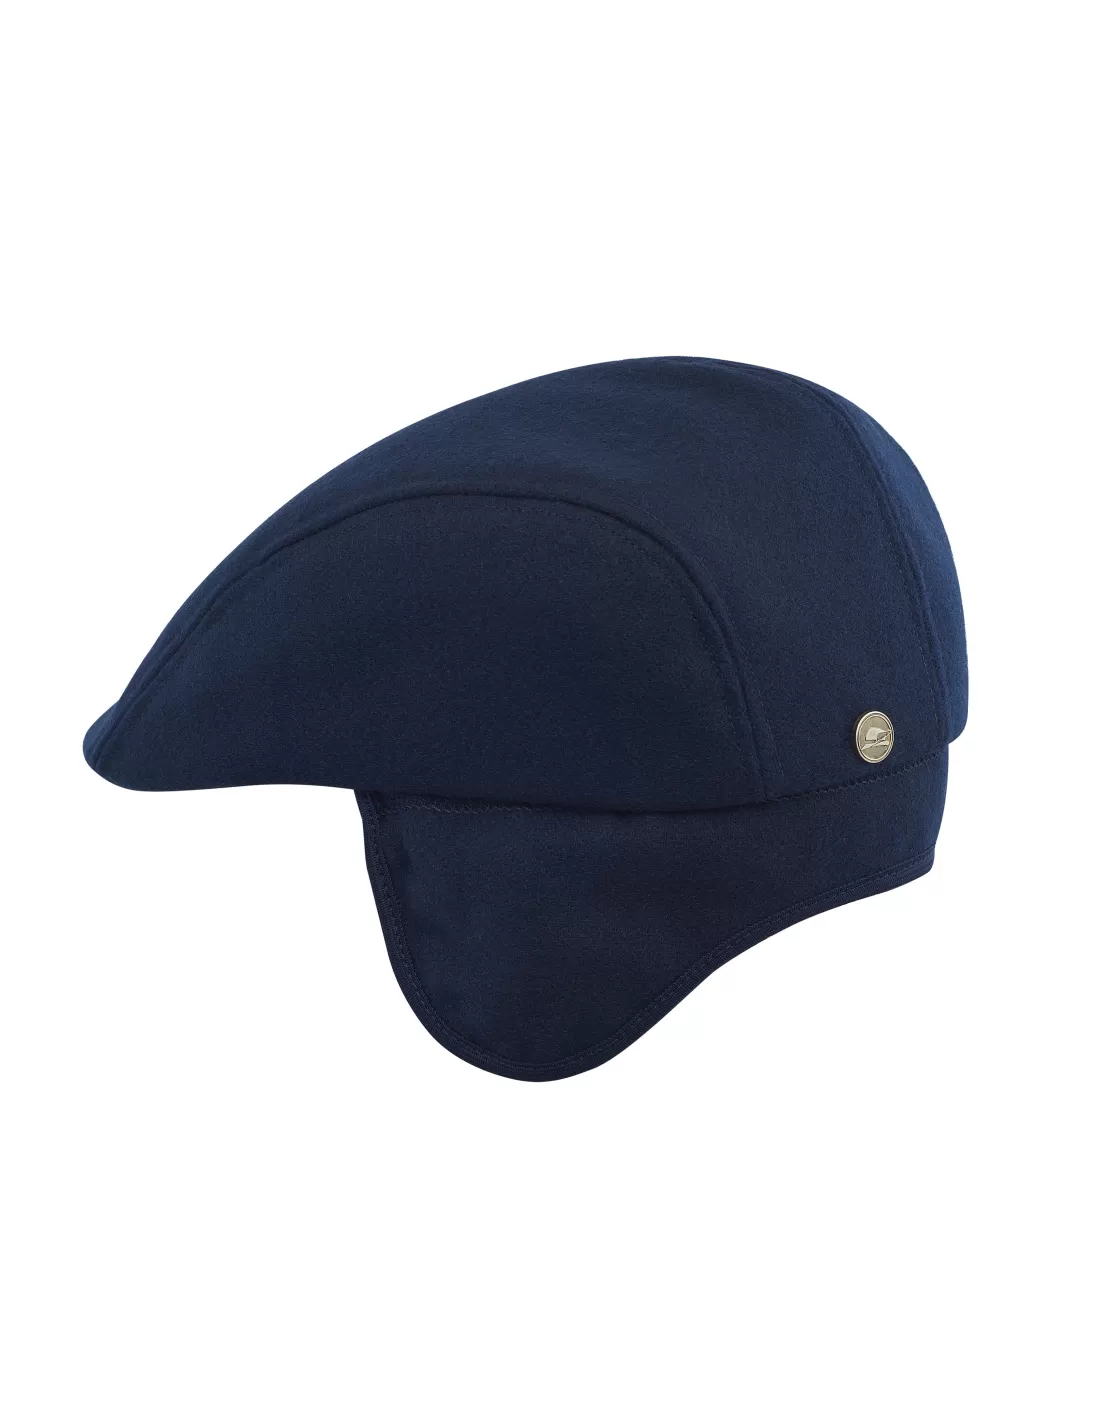 Norte - winter flat cap with foldable earflap made of wool, with padded  cotton lining